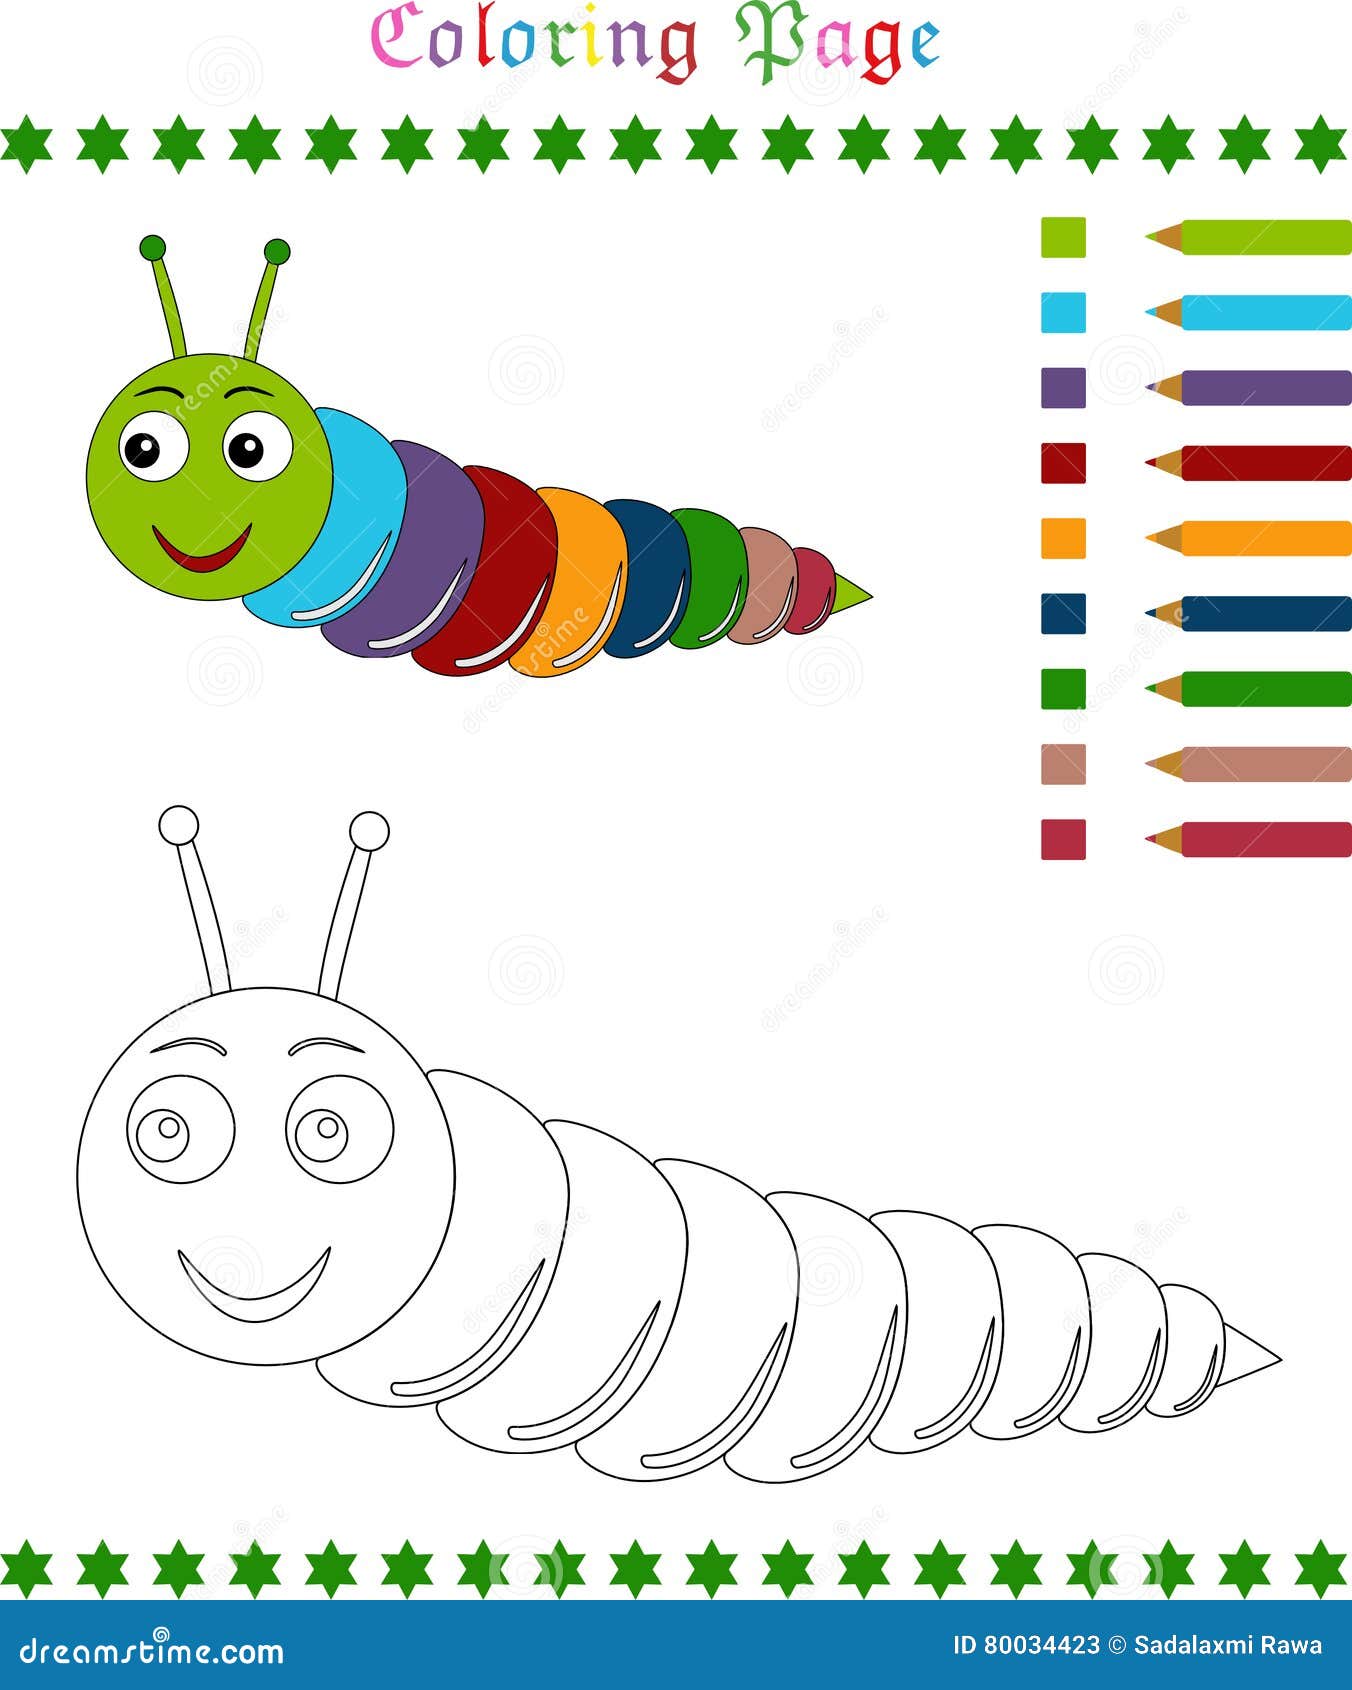 Caterpillar coloring page stock vector. Illustration of blue ...